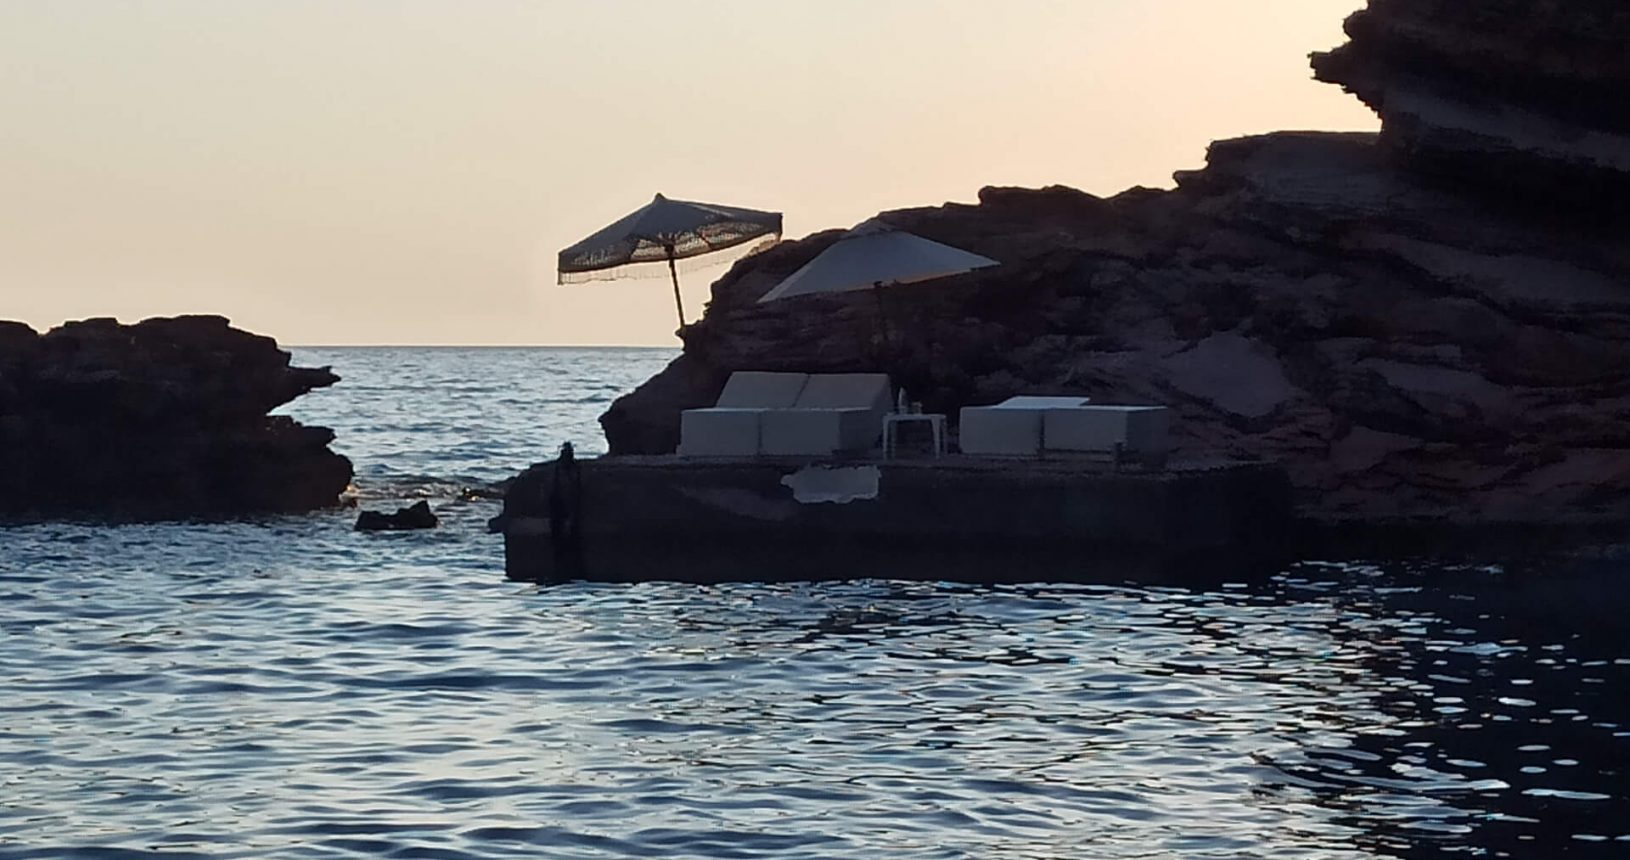 Separated sunbed at the rocks Crvena Glavica Beach